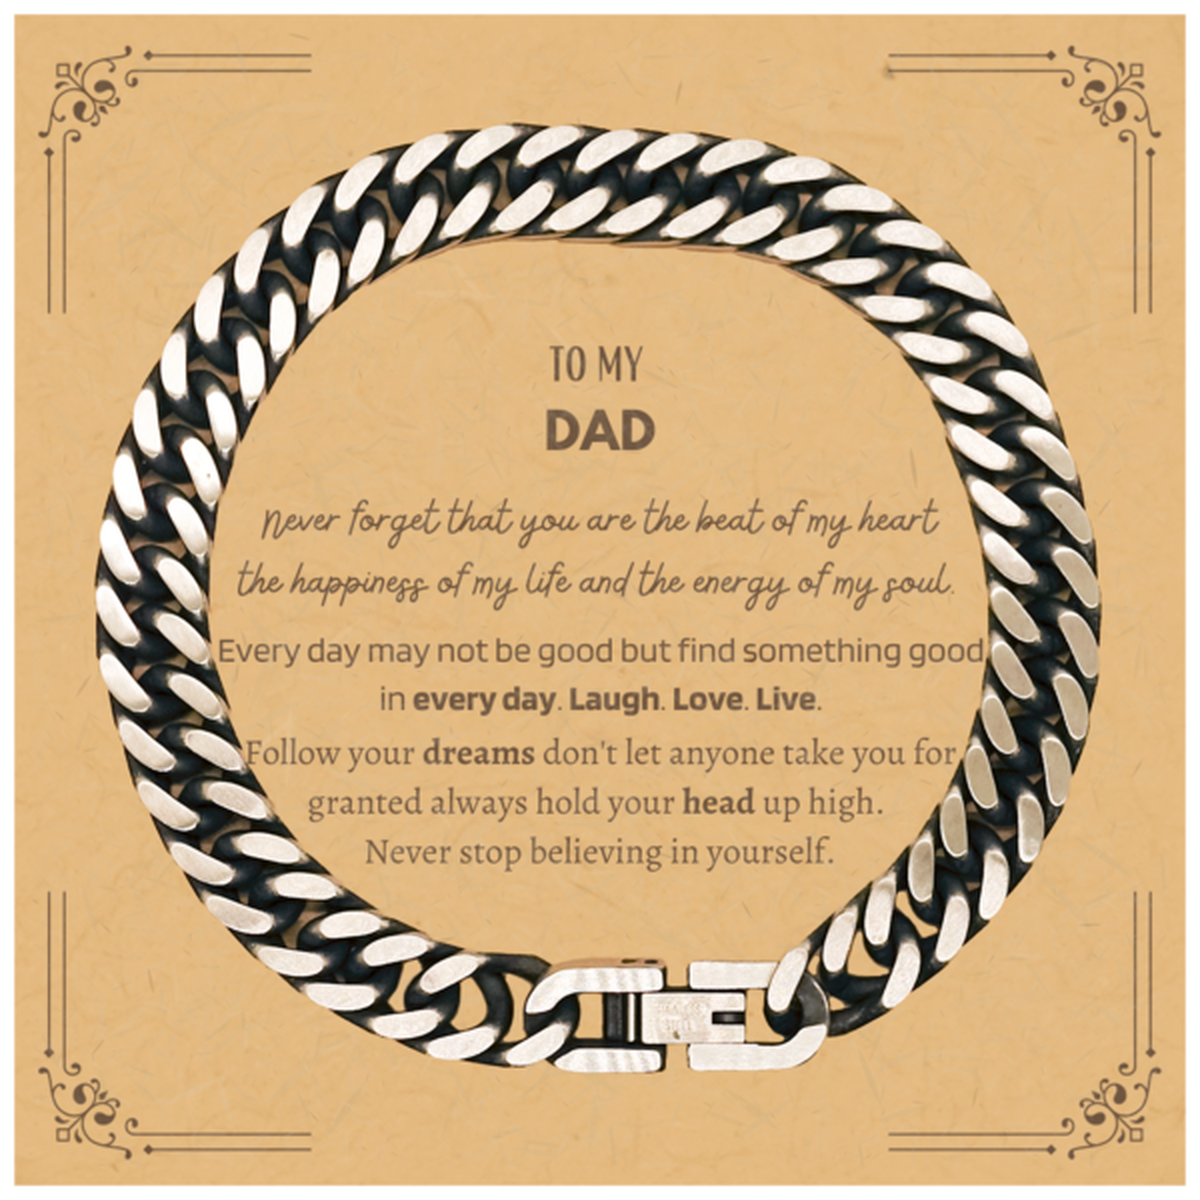 To My Dad Message Card Gifts, Christmas Dad Cuban Link Chain Bracelet Present, Birthday Unique Motivational For Dad, To My Dad Never forget that you are the beat of my heart the happiness of my life and the energy of my soul